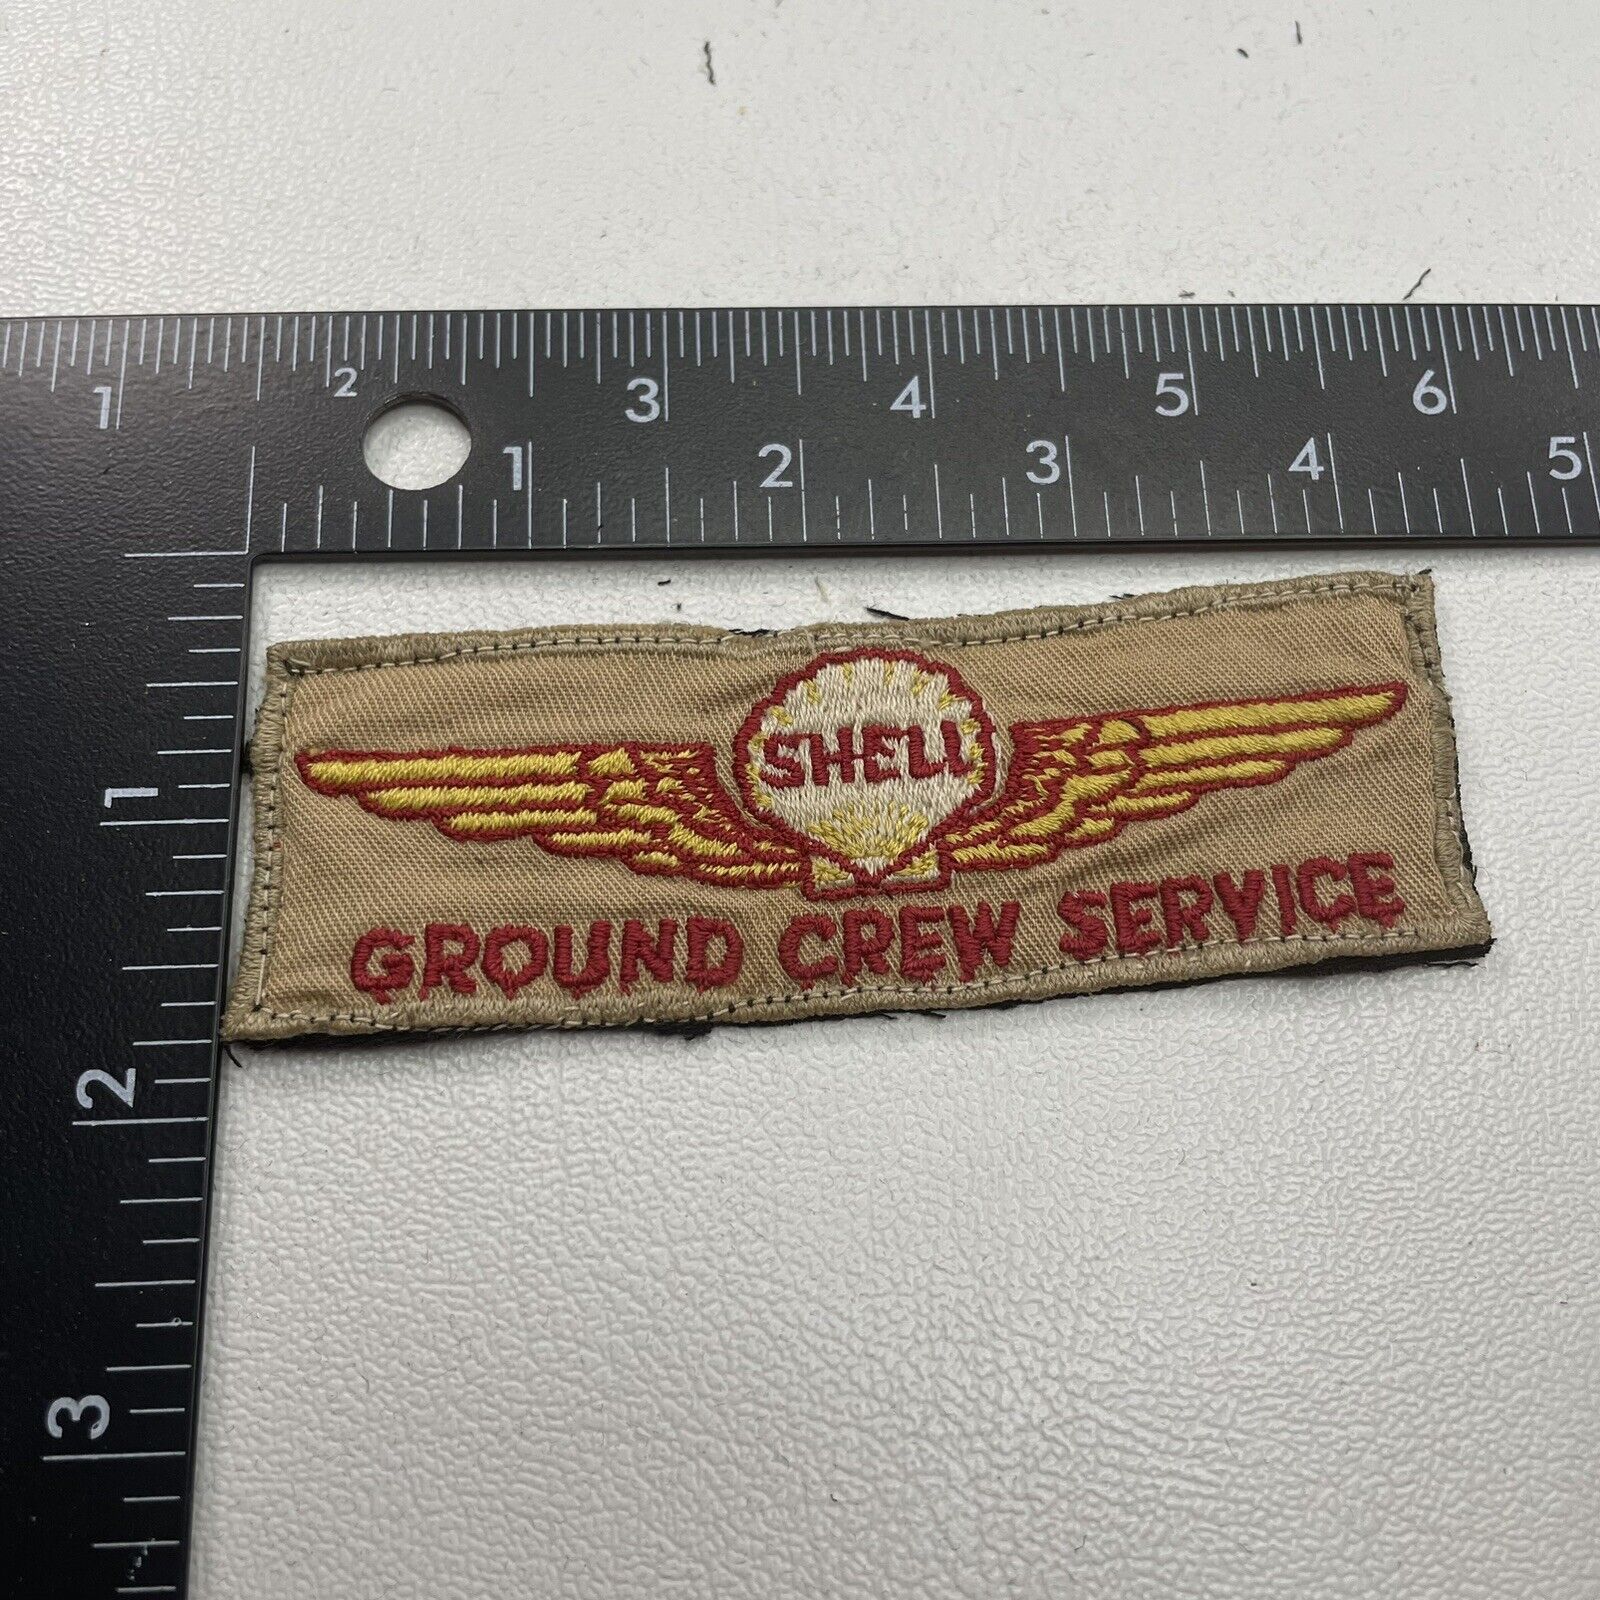 Vtg c 1960s Or Earlier Gas Station Oil SHELL GROUND CREW SERVICE Ad Patch 31U1